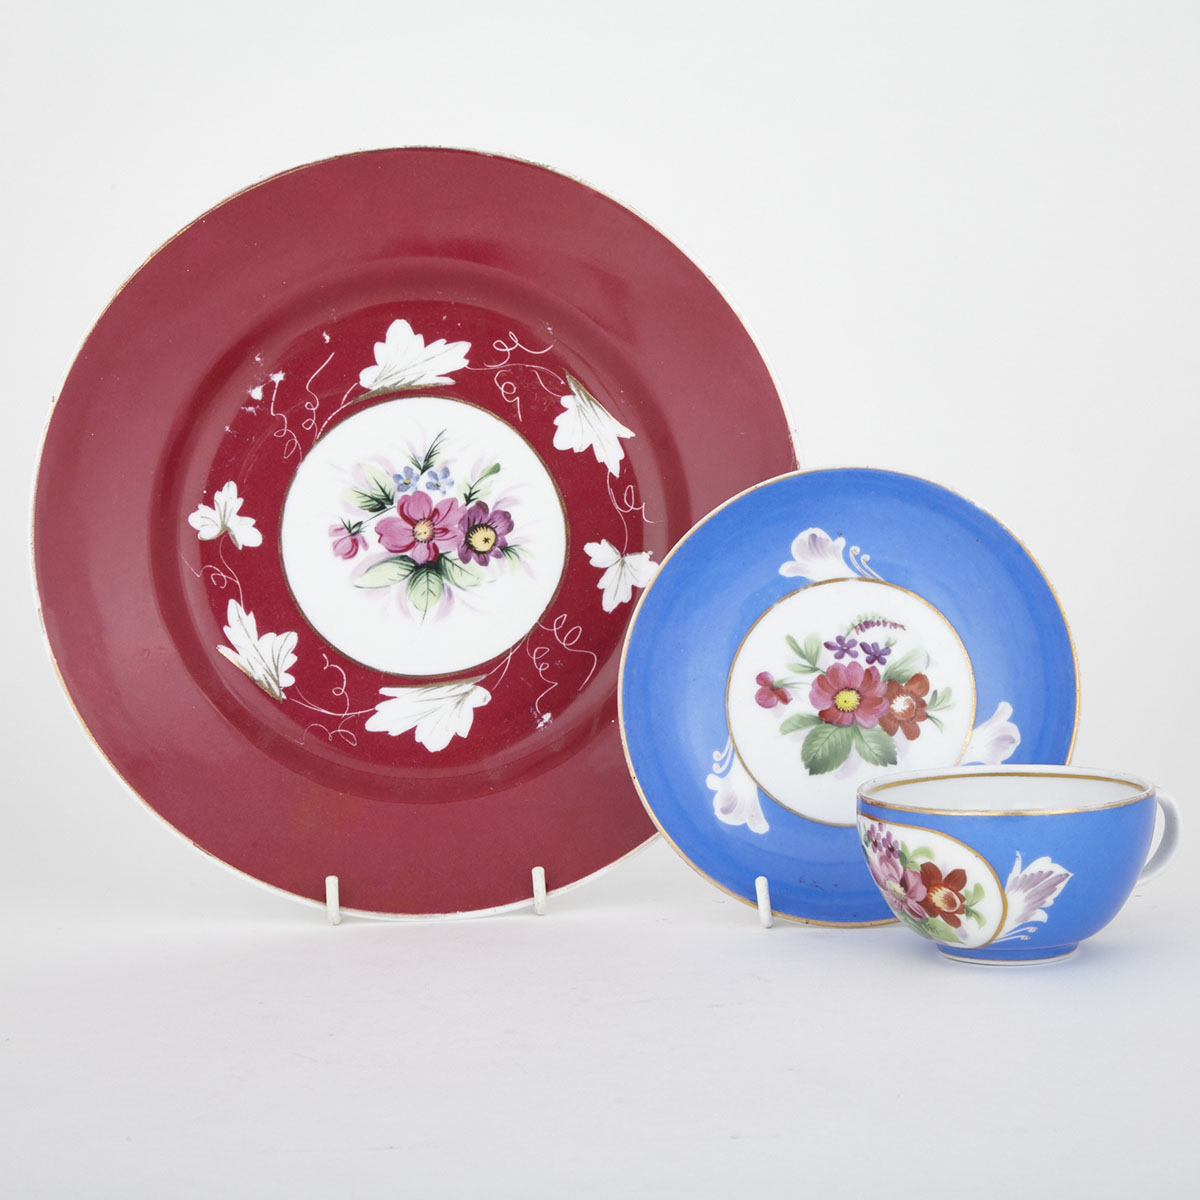 Russian Gardner Porcelain Tea Cup and Saucer and a Plate, for the Persian market, c.1900
